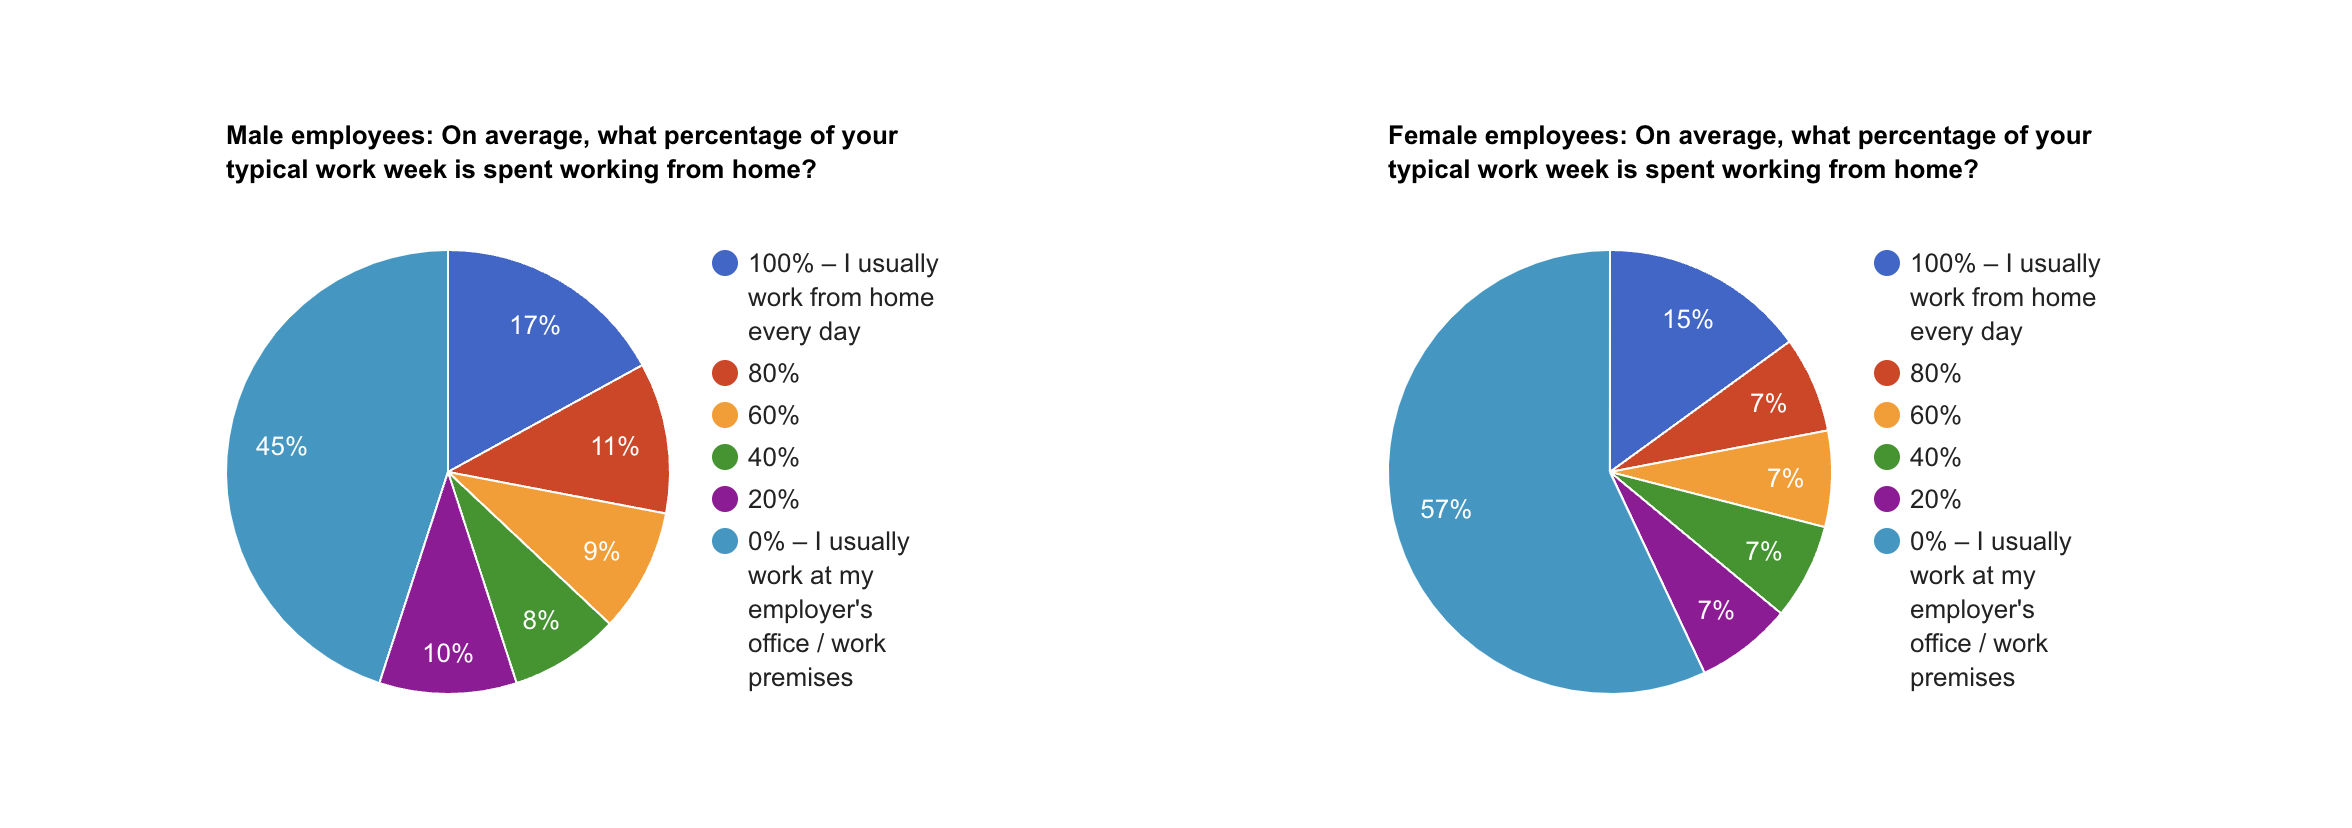 Percentage of the week that employees typically work from home